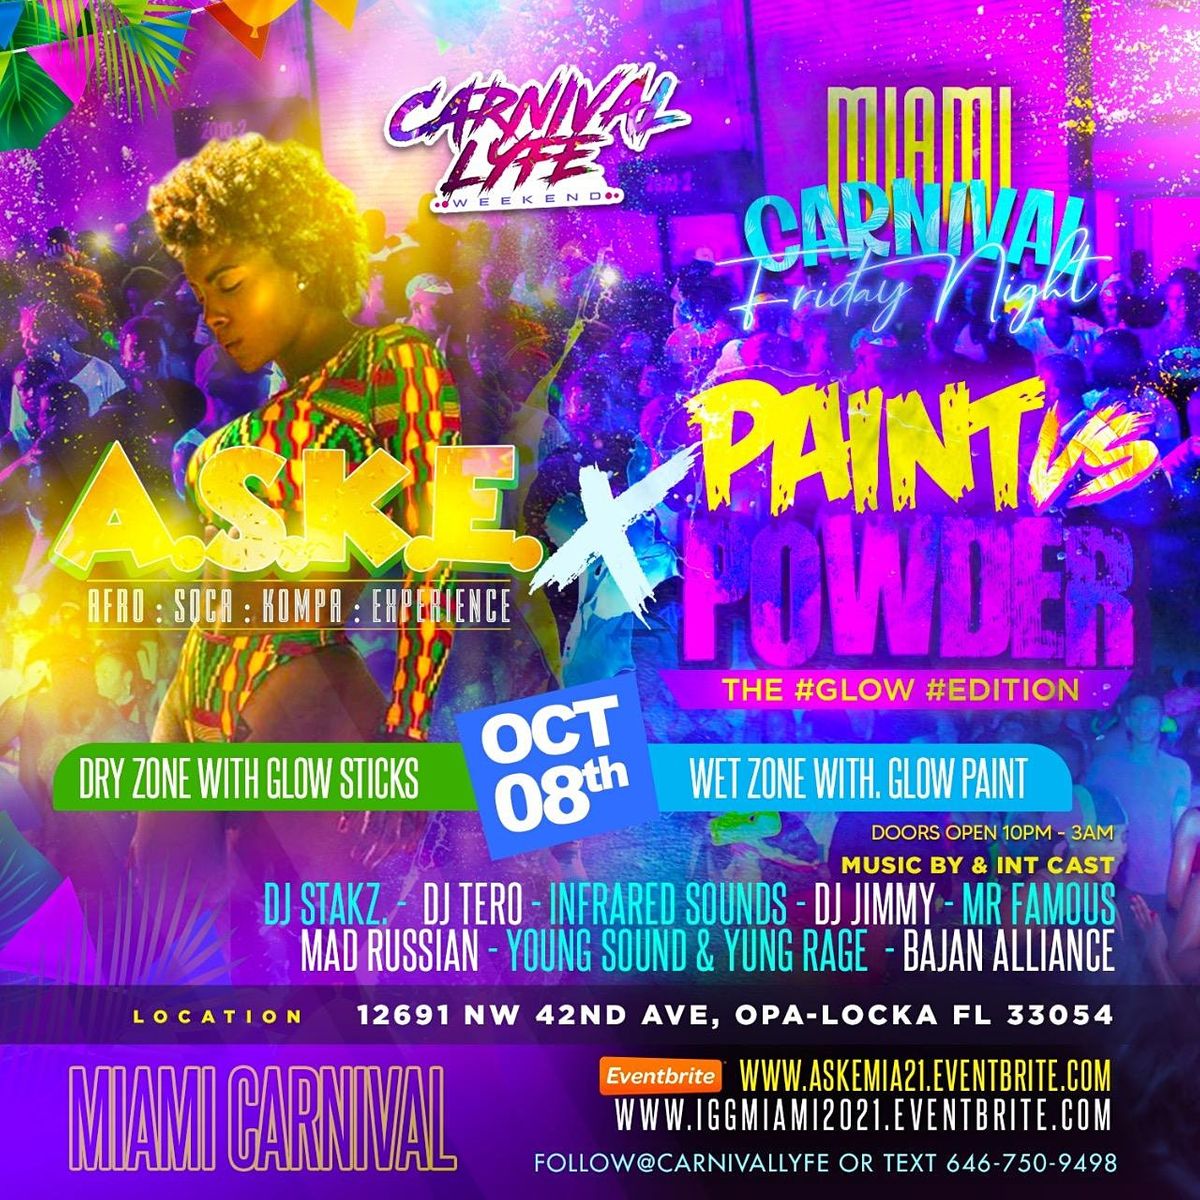 EVENT #3 A.S.K.E - AFRO | SOCA | KOMPA | EXPERIENCE  GLOW EDITION